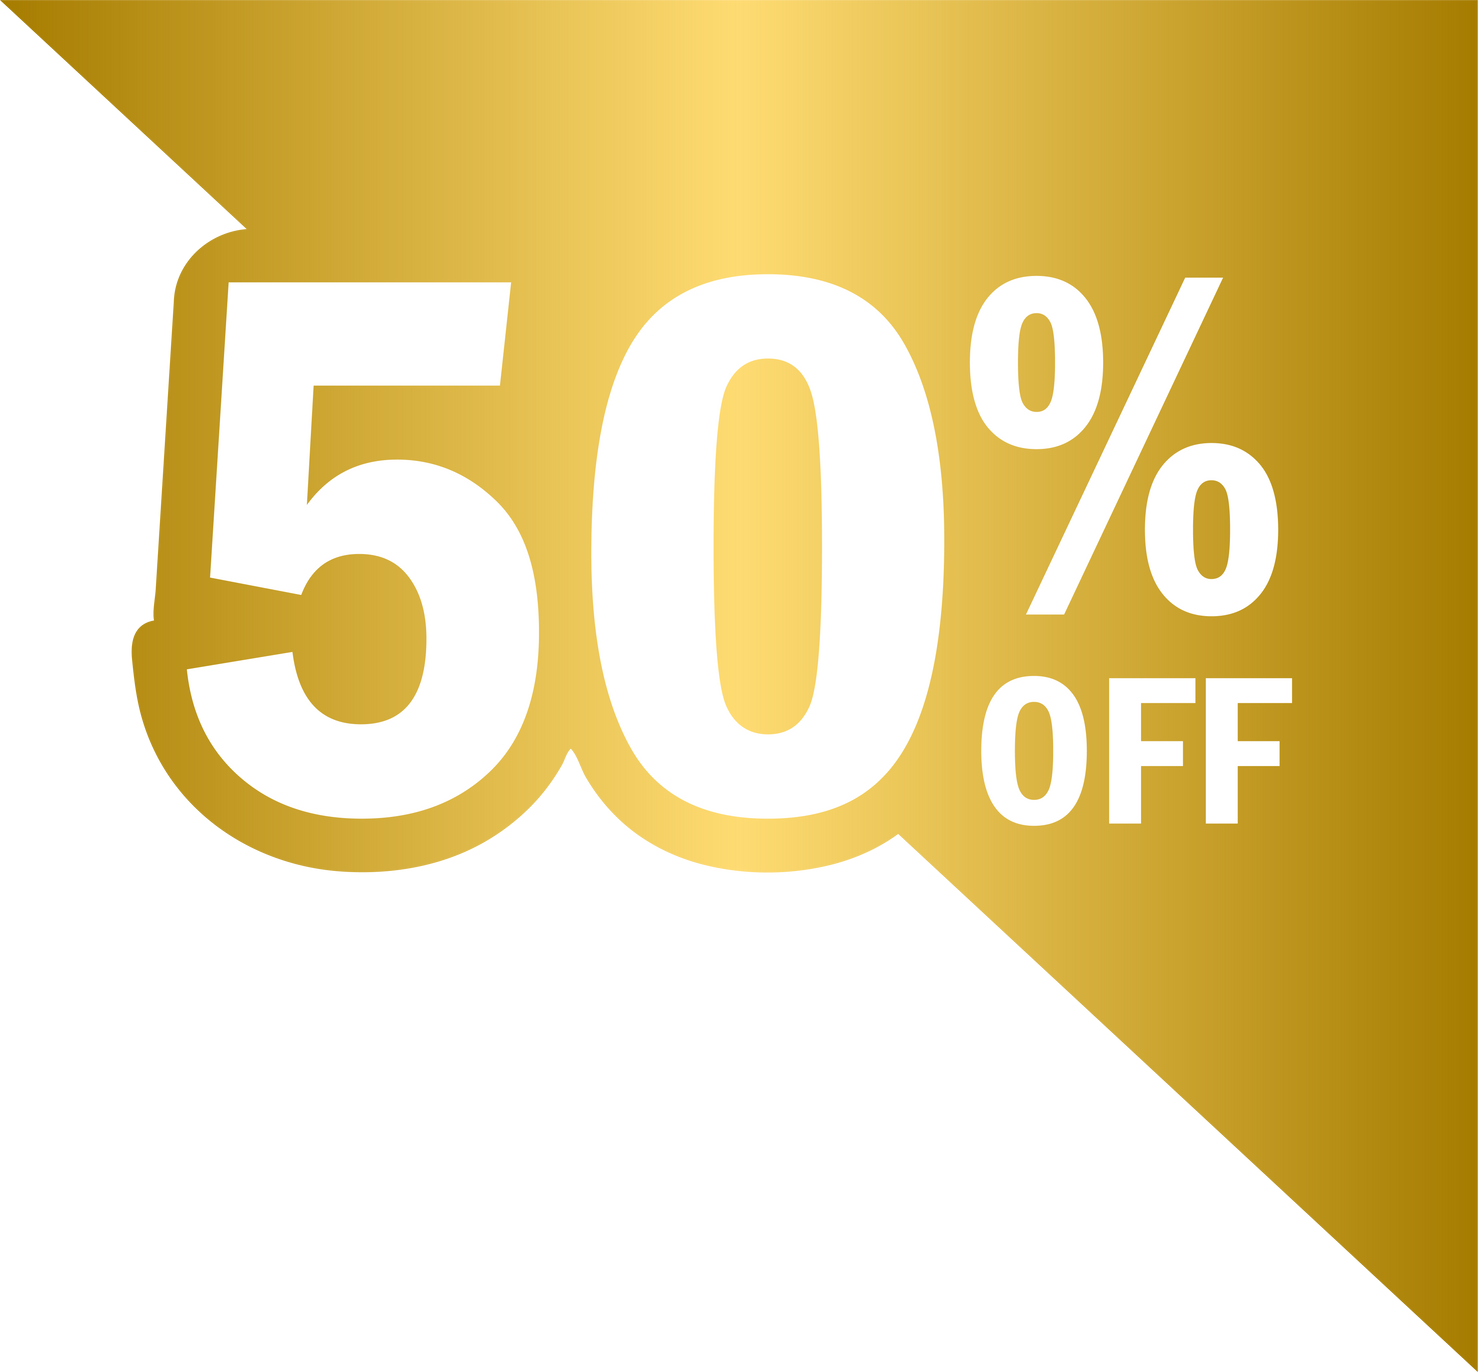 Discount 50% off golden tag